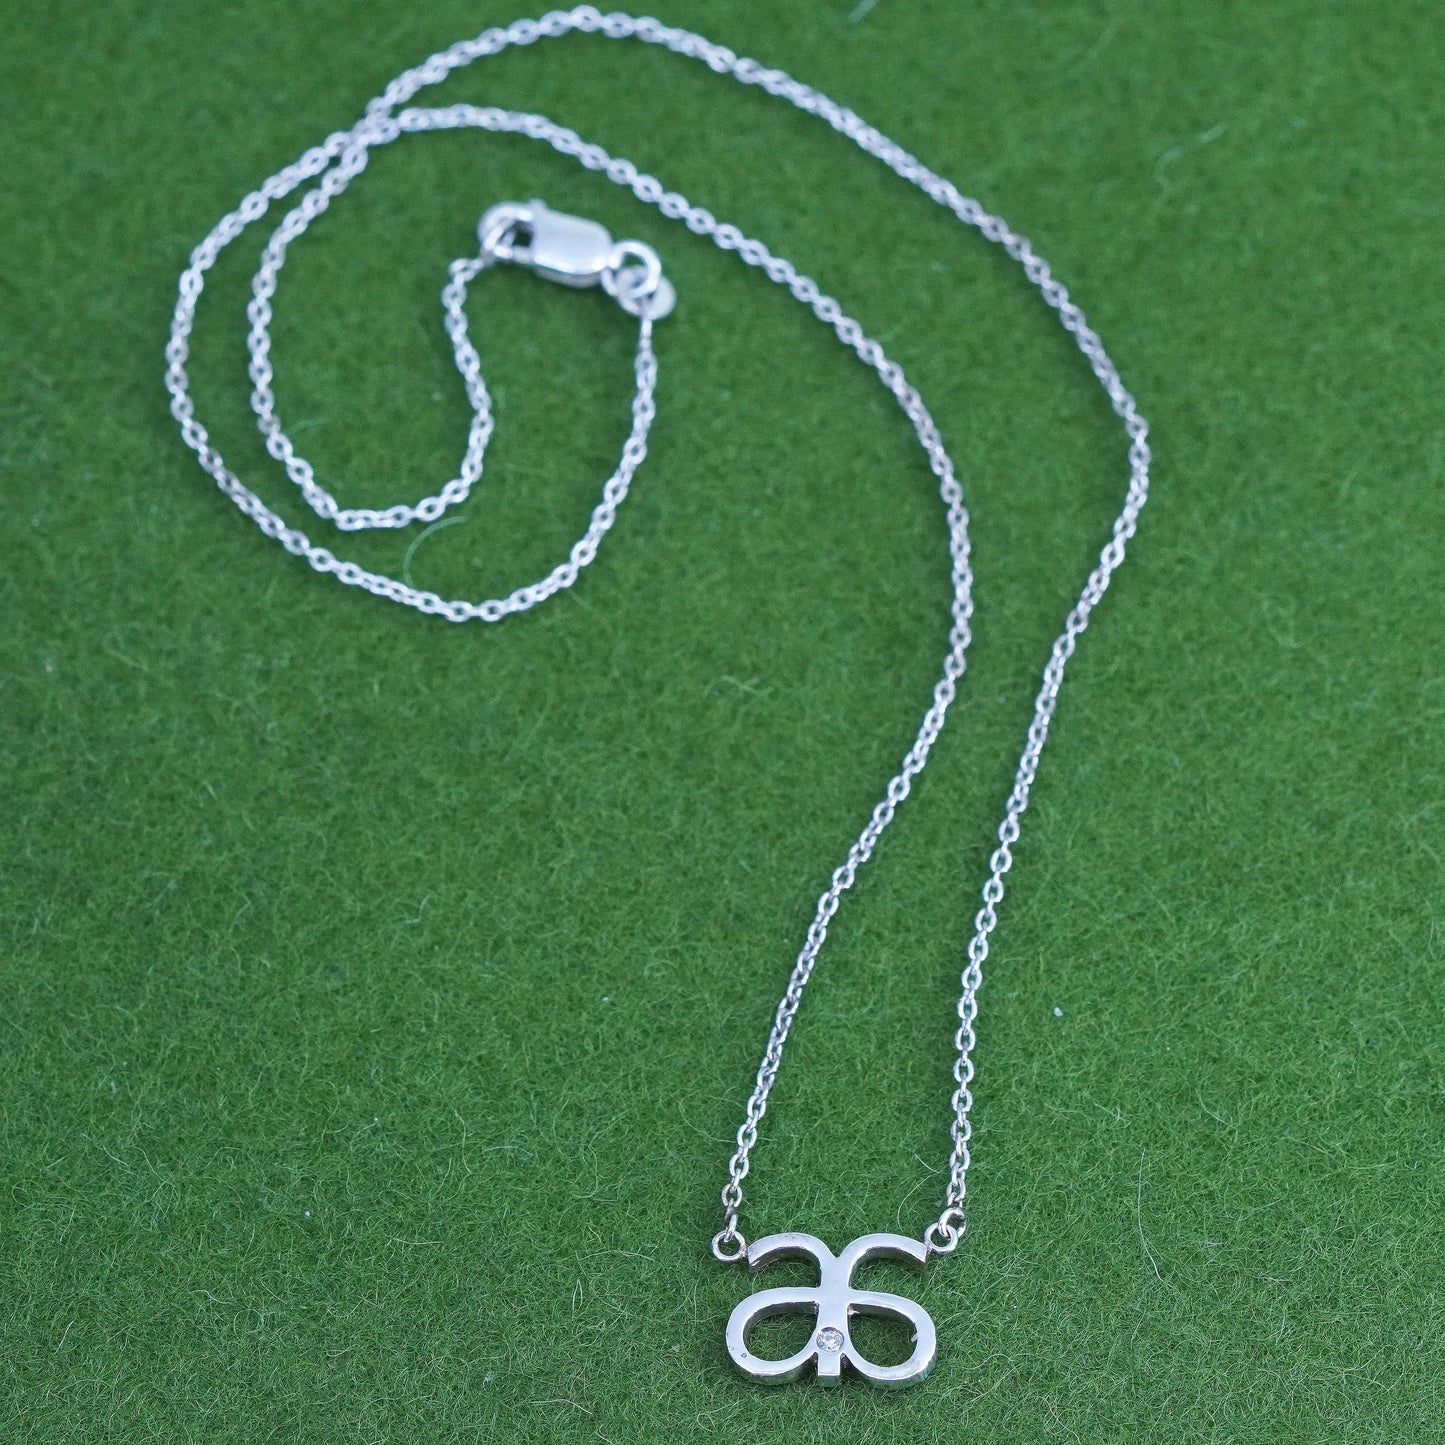 16”, Sterling silver necklace, 925 circle chain with double a pendant diamond